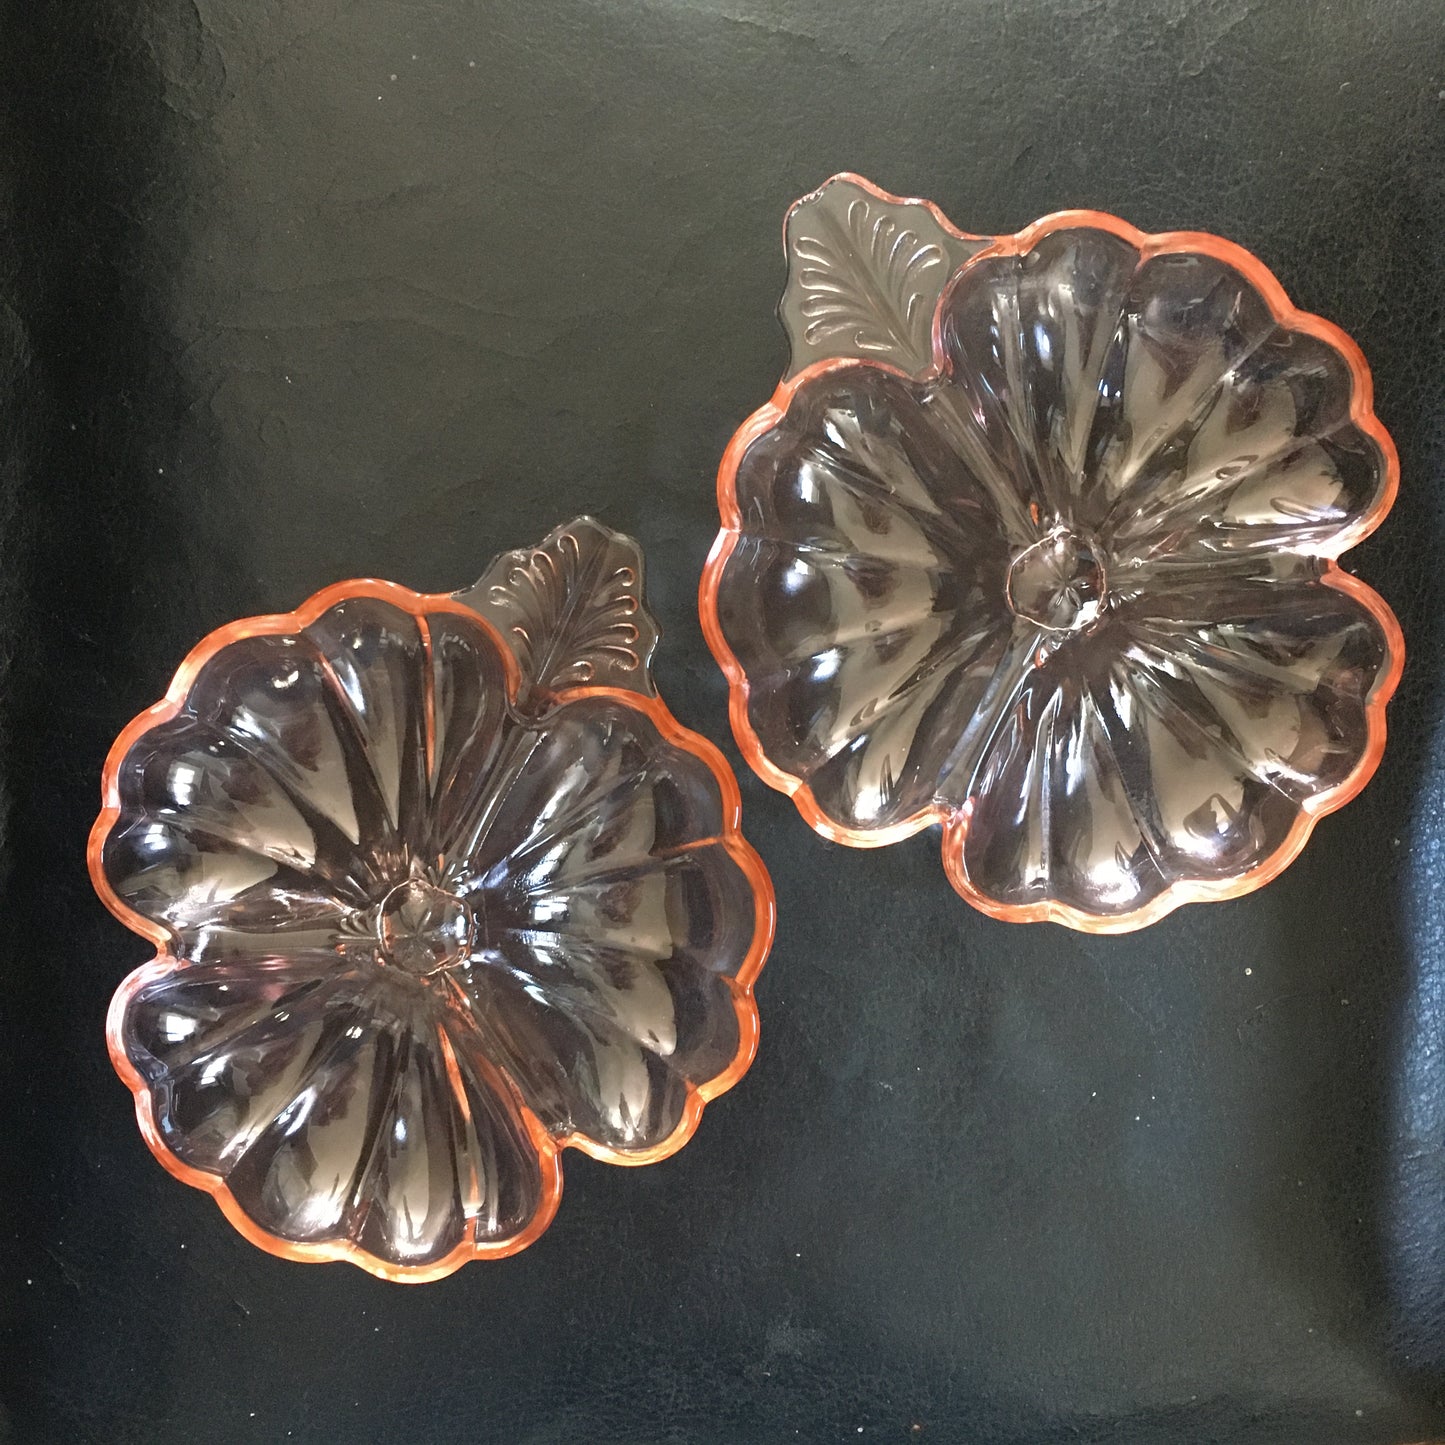 Pink Depression Glass Candy Dishes